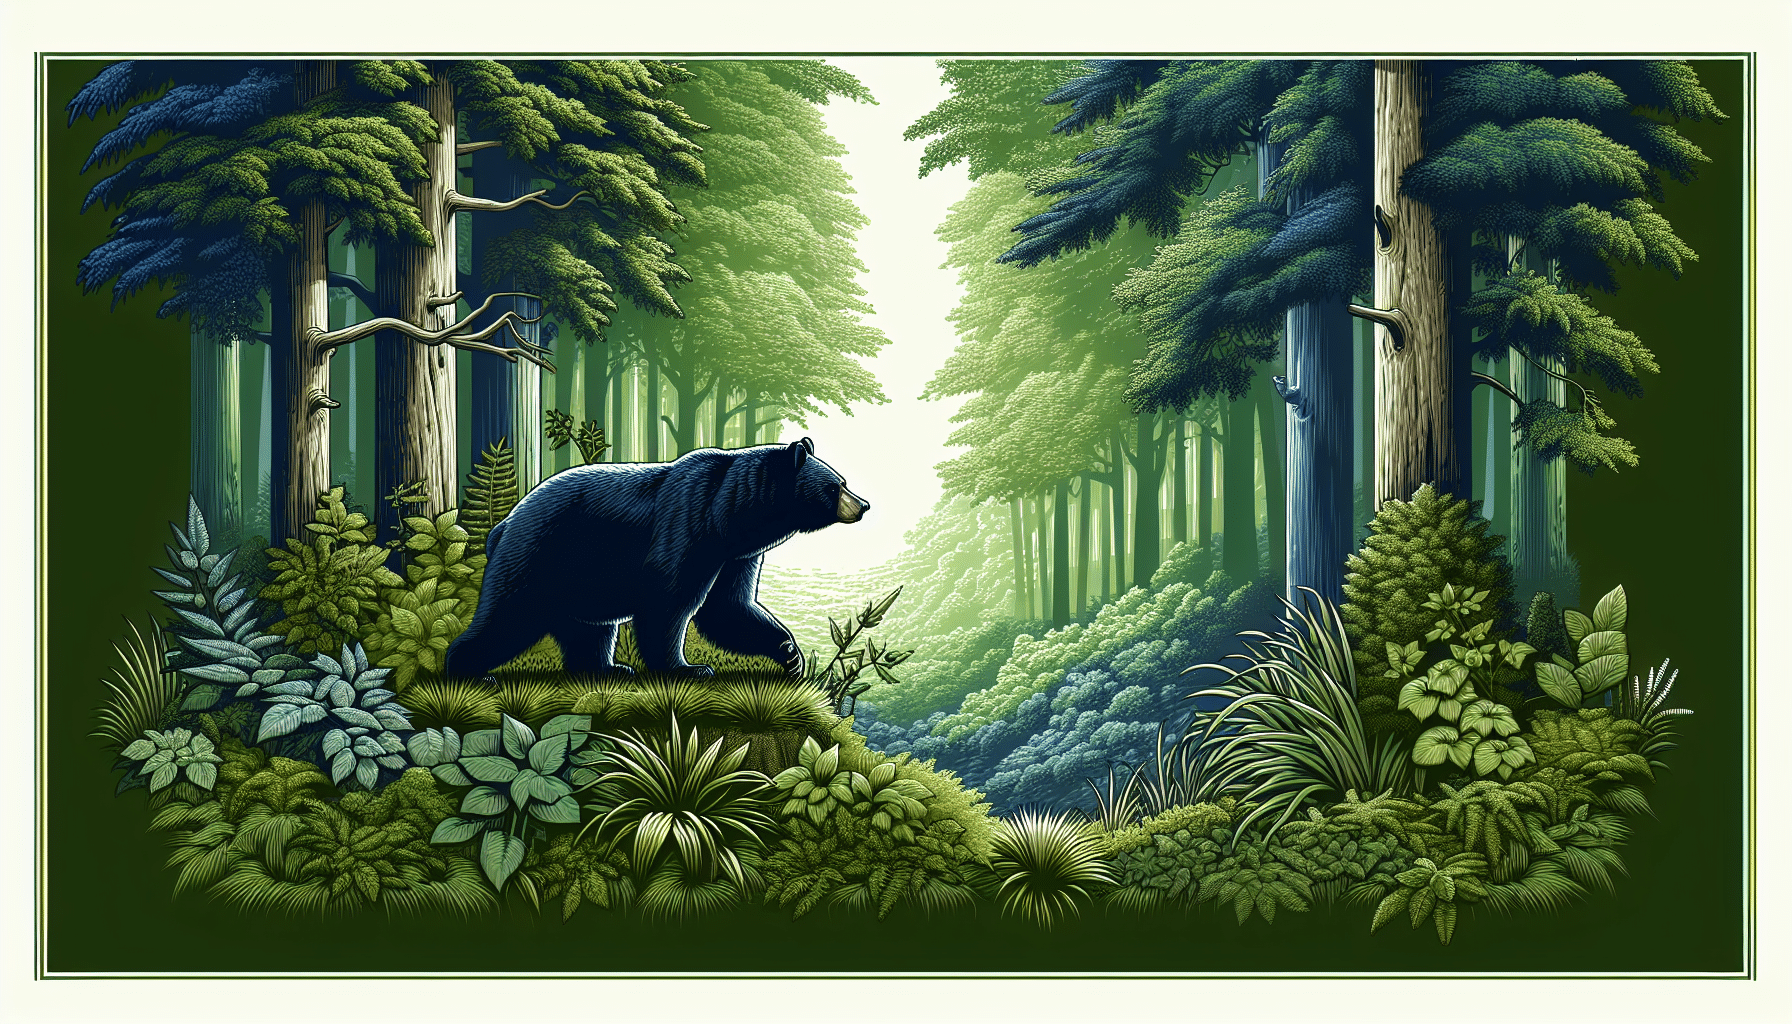 A detailed image depicting a lush forest environment with a magnificent black bear at its center. The bear should appear healthy and serene, symbolizing longevity, as it strides through the undergrowth, lush green foliage and tall trees surrounding it. Please ensure no human figures, text, brand names, or logos are present within the scene.